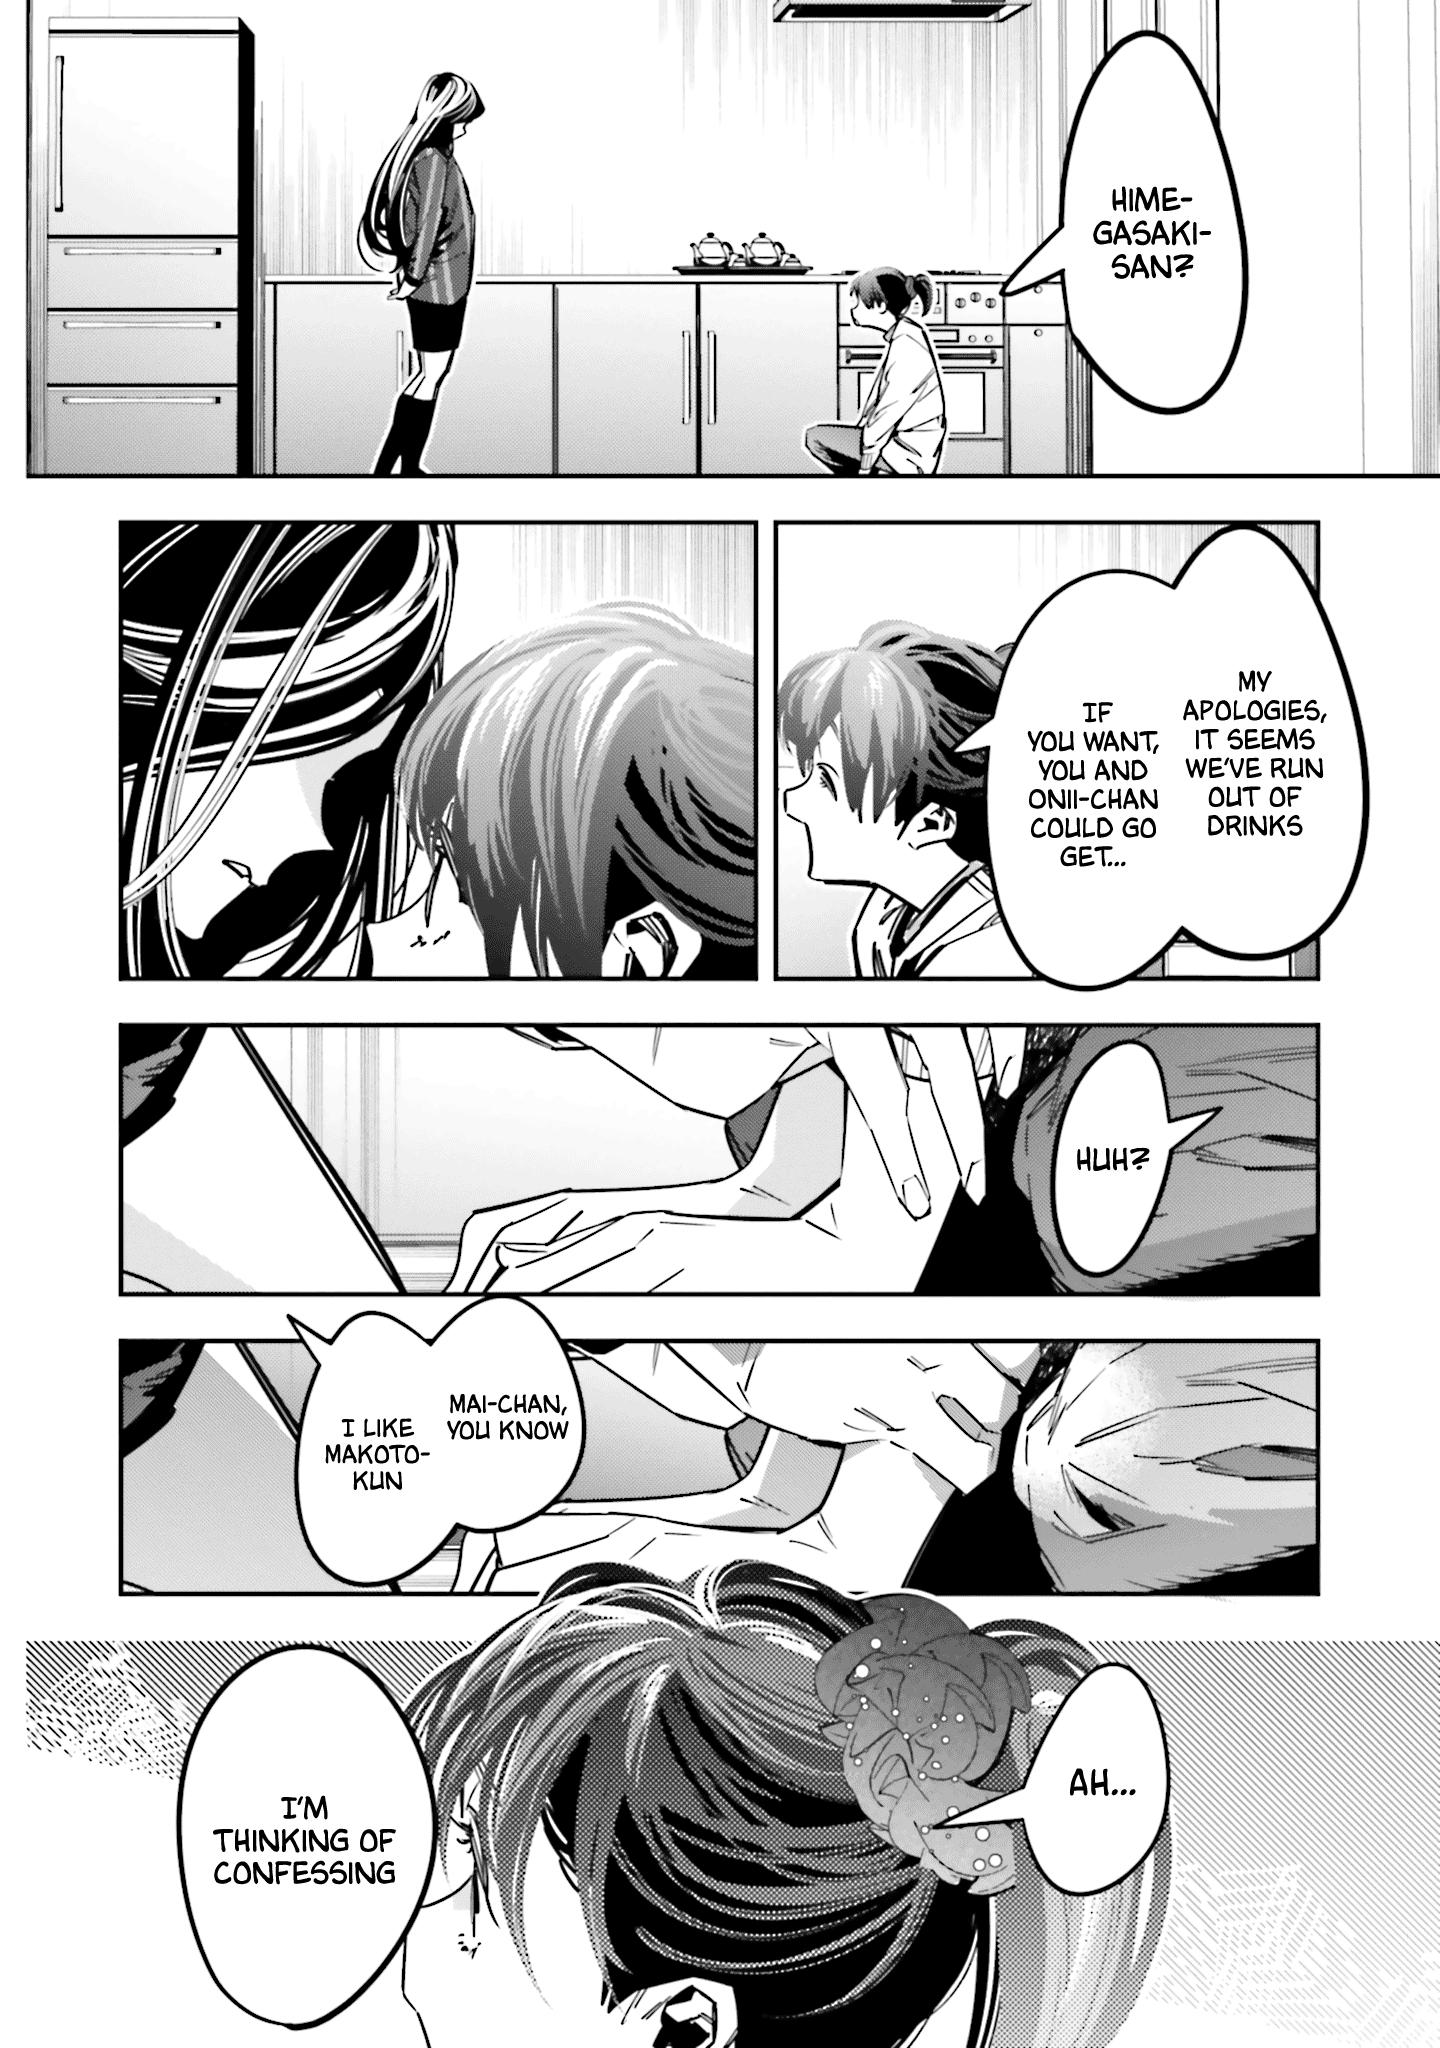 I Reincarnated As The Little Sister Of A Death Game Manga's Murder Mastermind And Failed Chapter 10 #8